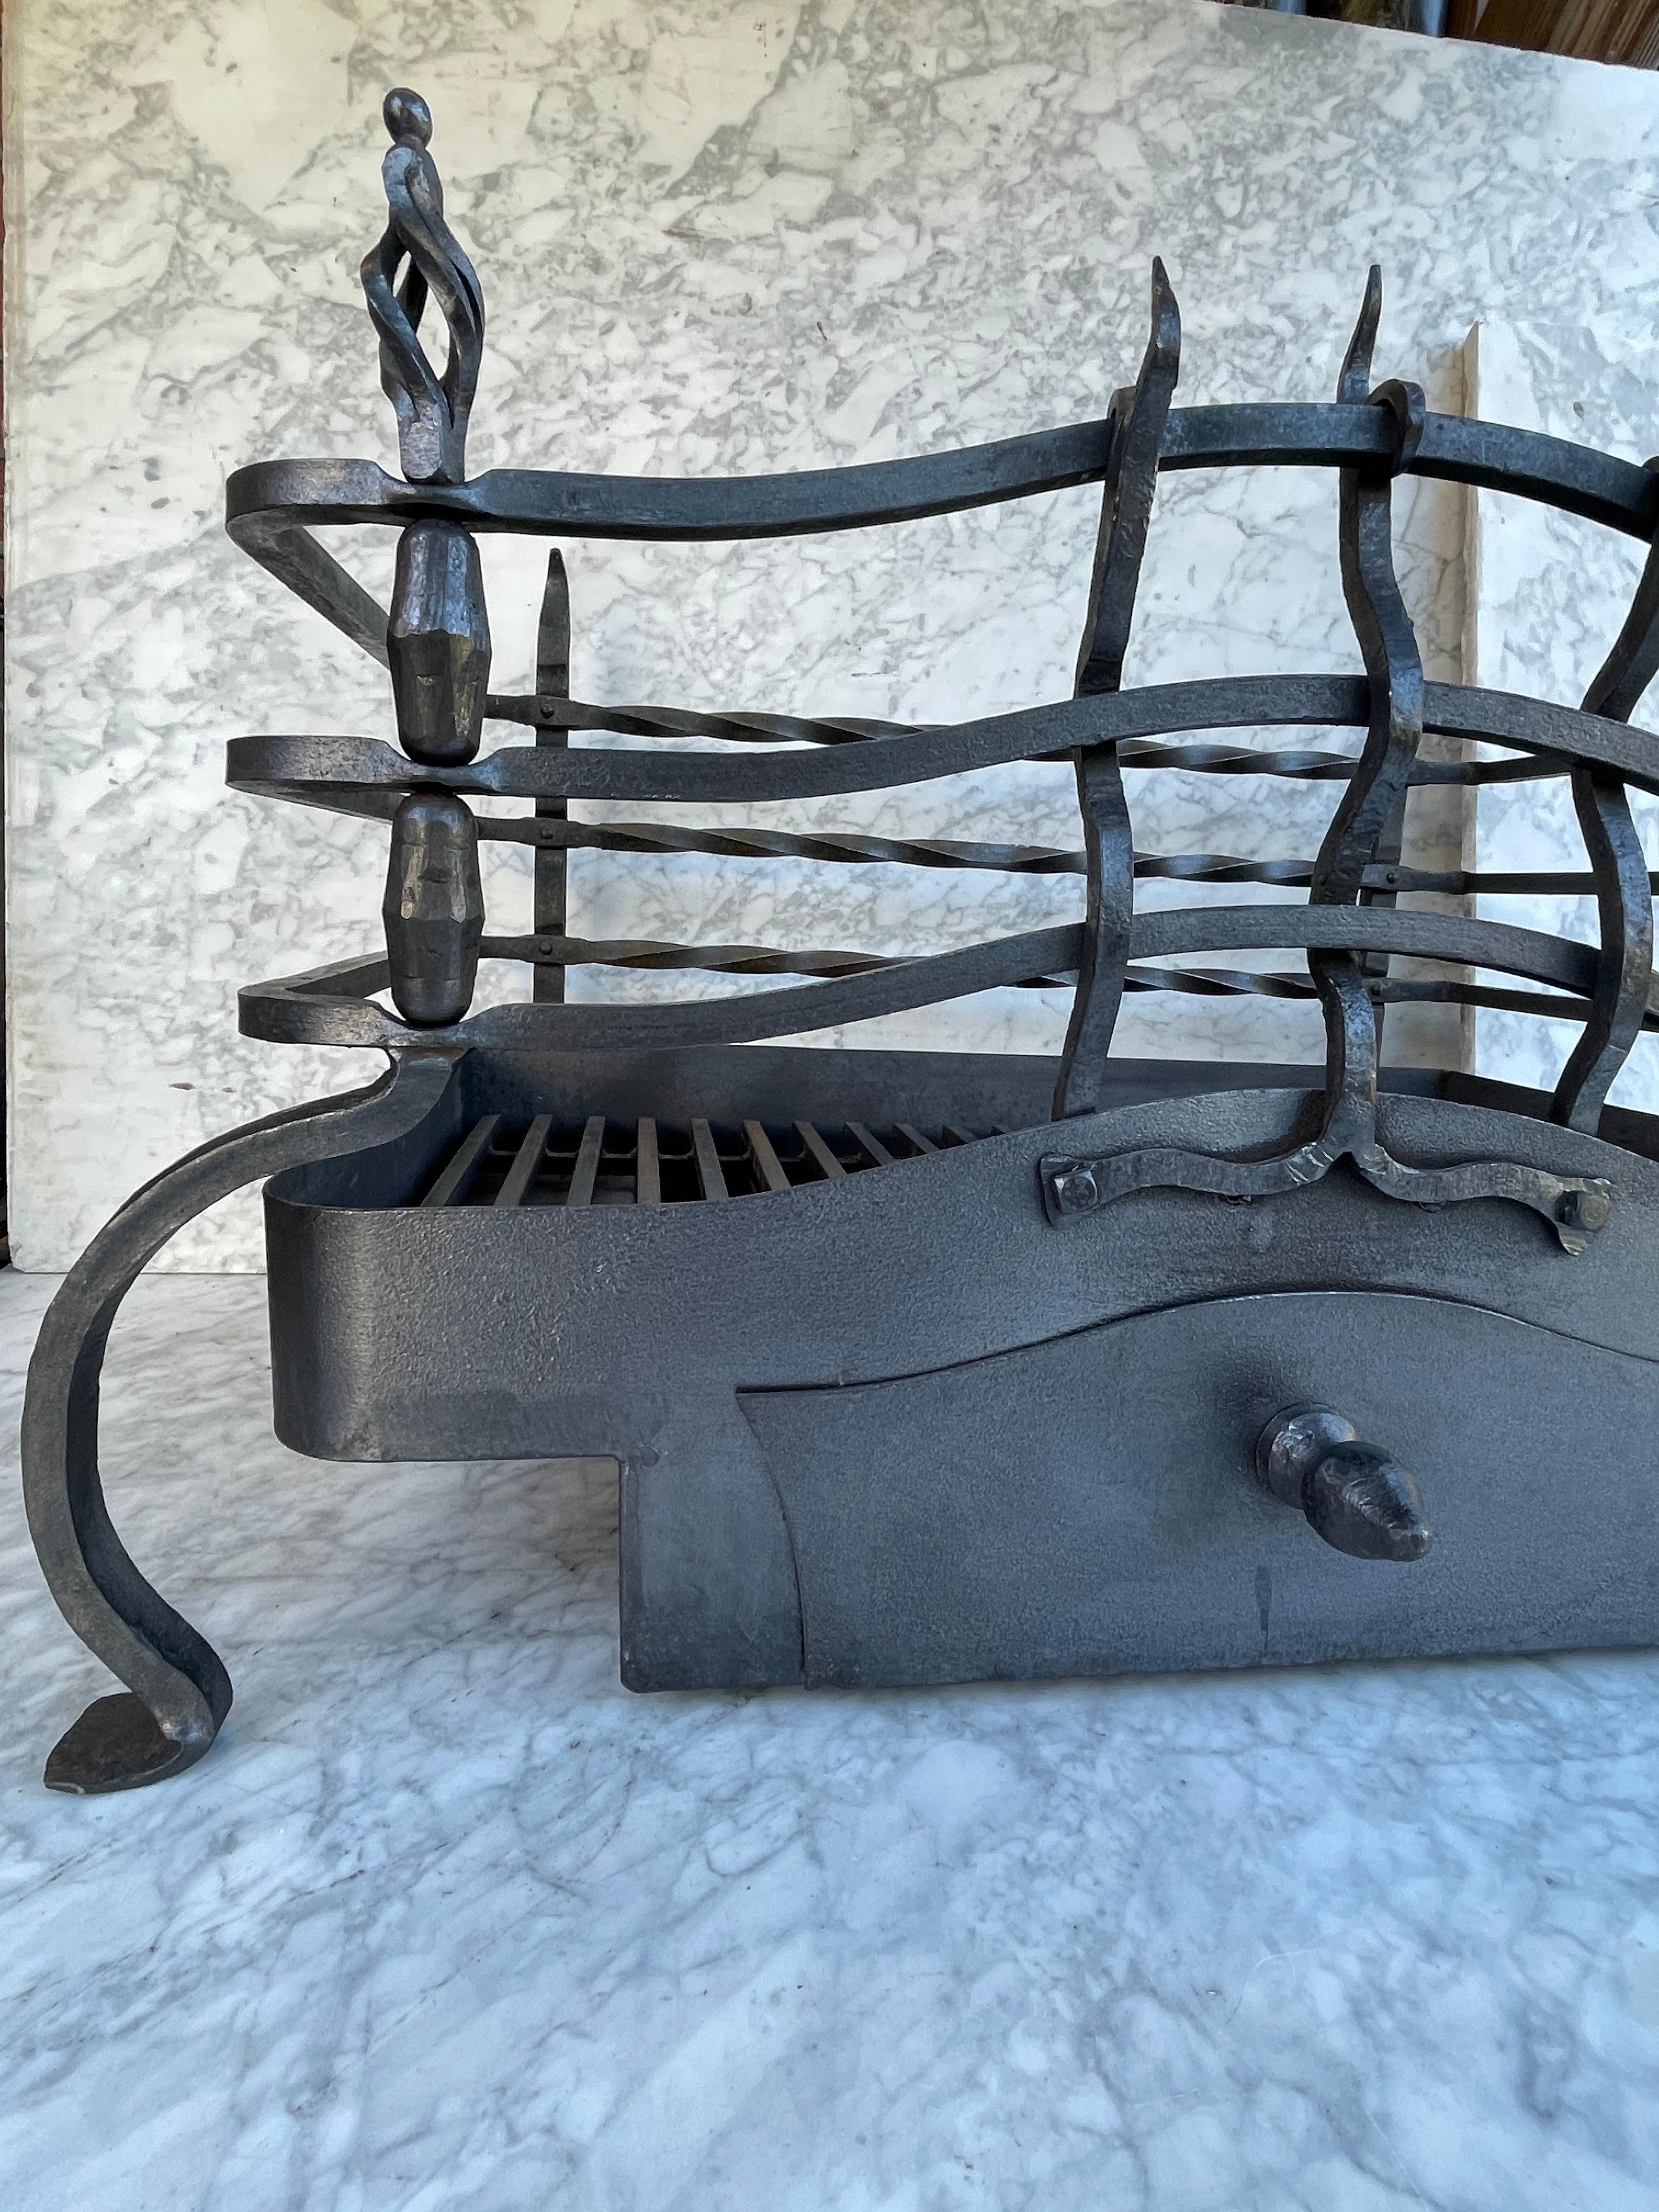 This wrought iron antique fireplace grate or basket is a real showpiece. The dimensions and craftsmanship are visible from every angle. The Basket comes with a removable ash drawer.